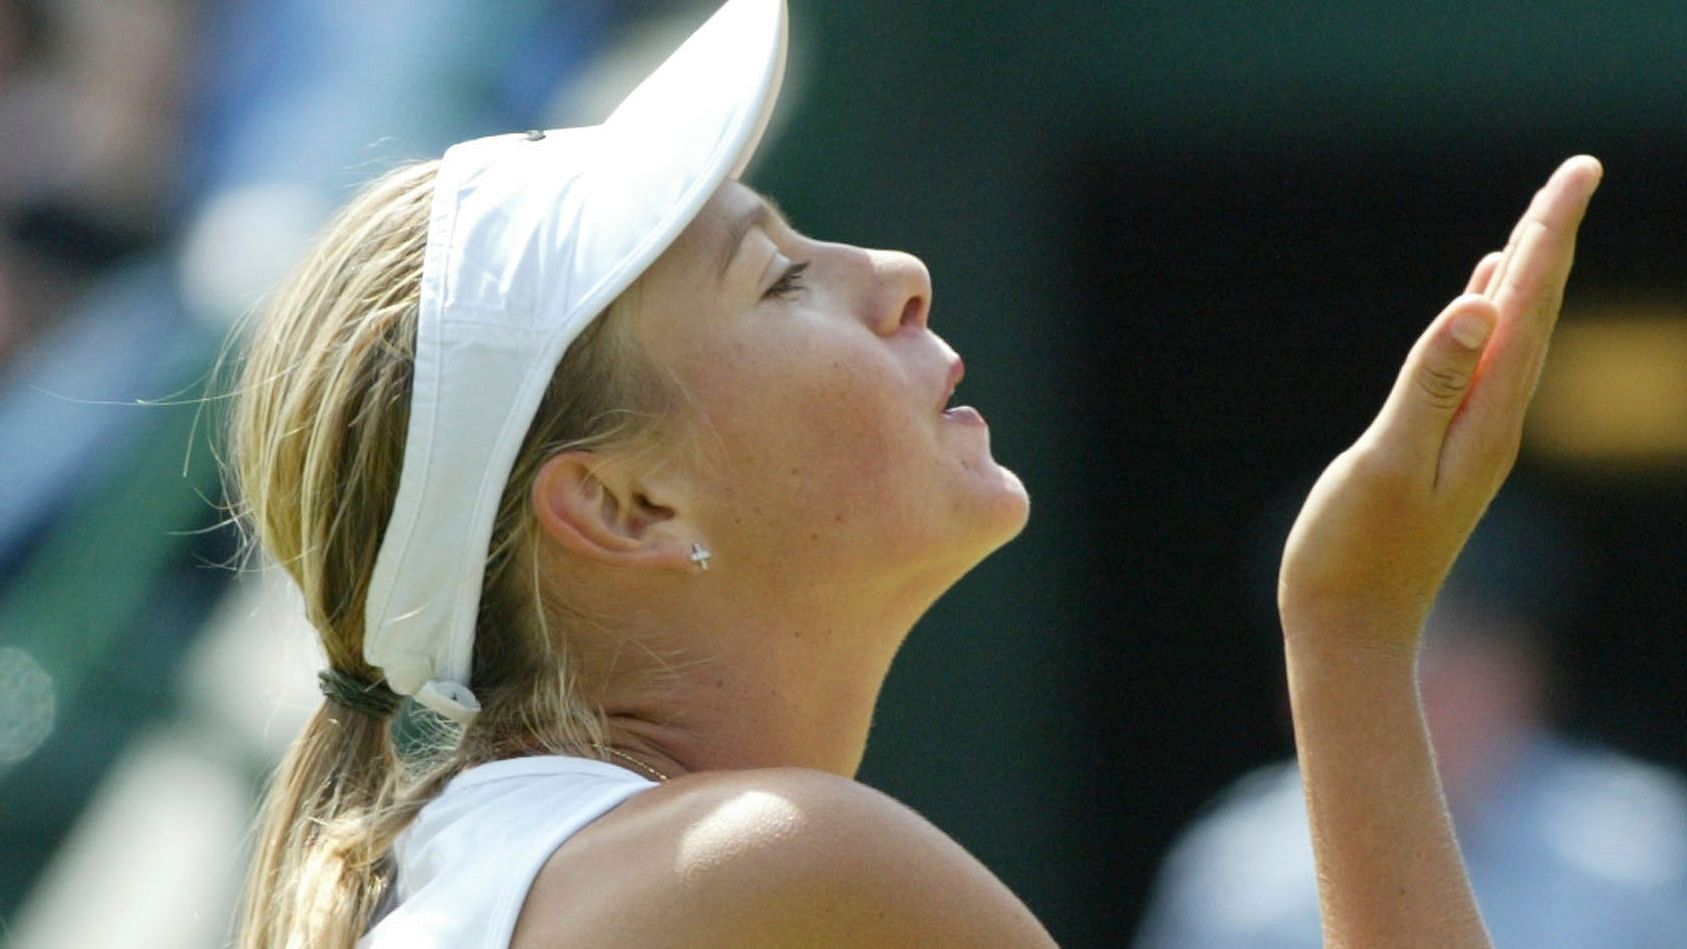 Former Grand Slam champion and world number 1 Maria Sharapova has retired from tennis.